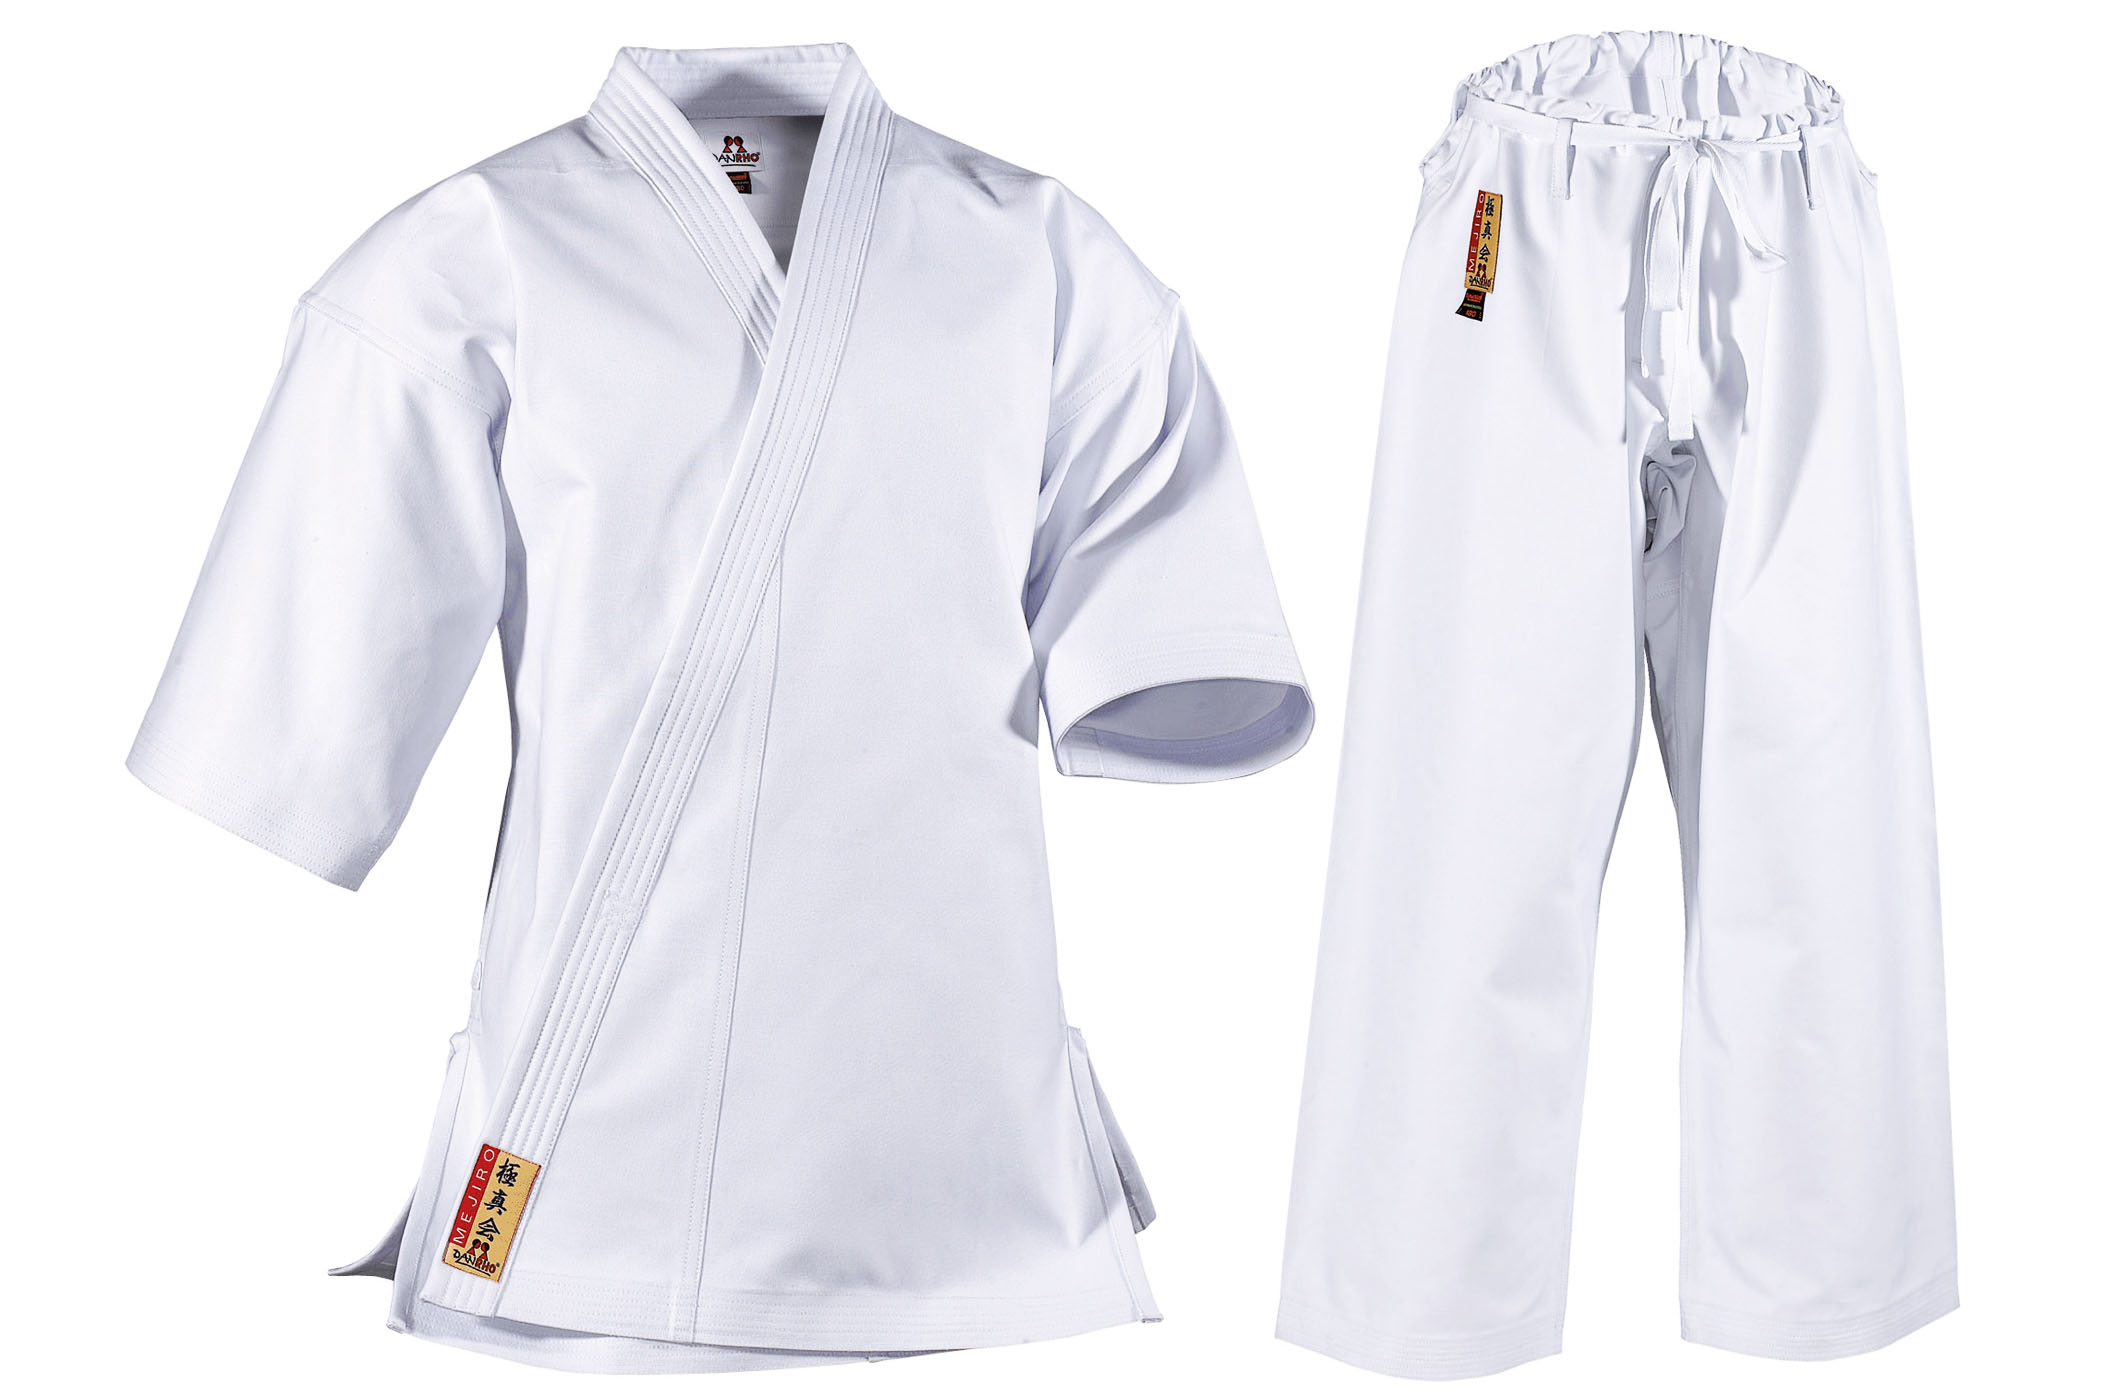 Professional Gi Good for MMA Martial Arts Fight Lightweight Kimono WKF 110-190 cm White Cotton Fabric for Kids Men and Women Come with White Belt Starpro Karate Suit Uniform Kit